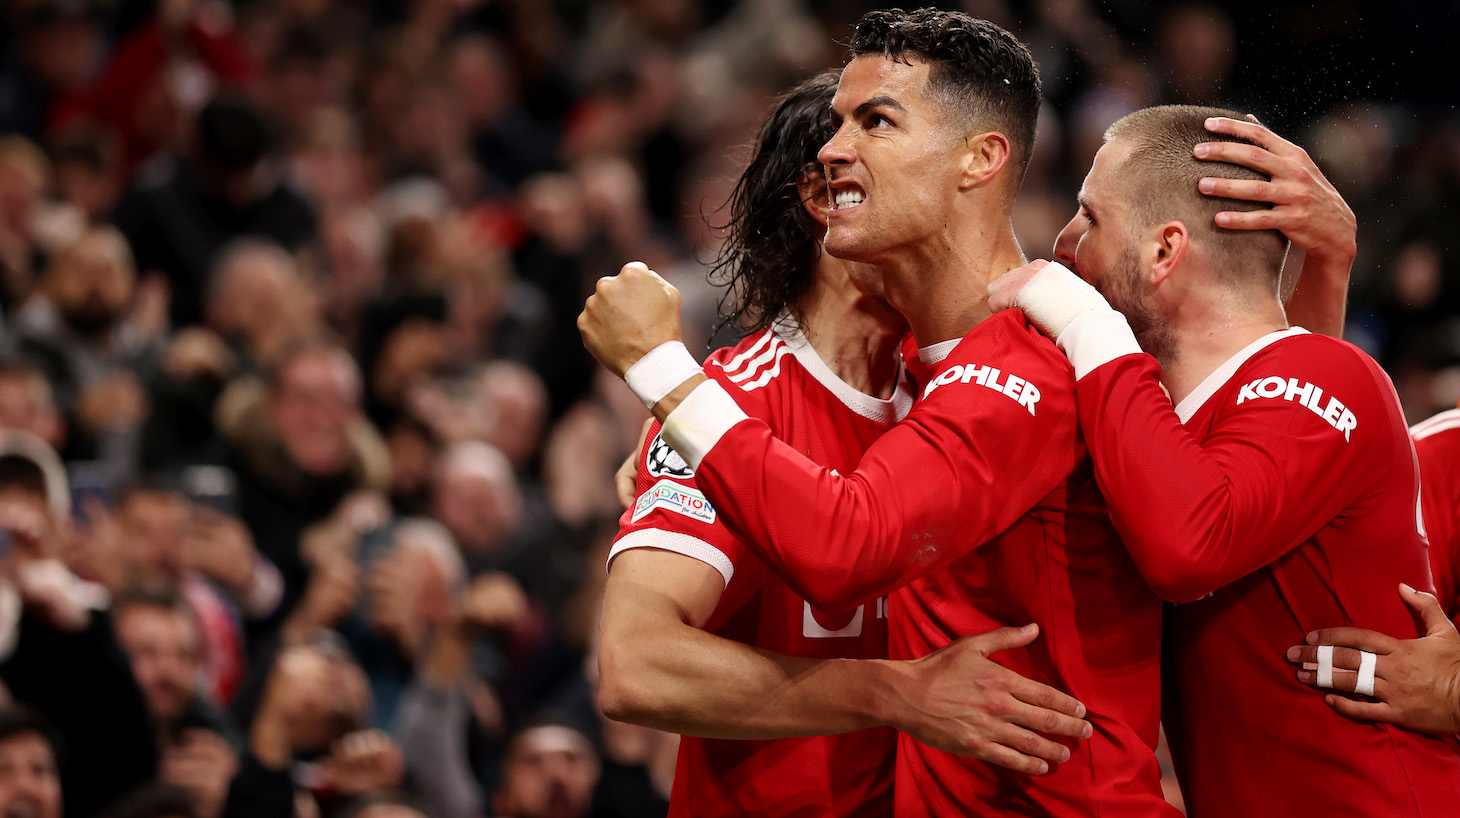 Cristiano Ronaldo of Manchester United celebrates after scoring their side's third goal during the UEFA Champions League group F match between Manchester United and Atalanta at Old Trafford on October 20, 2021 in Manchester, England.